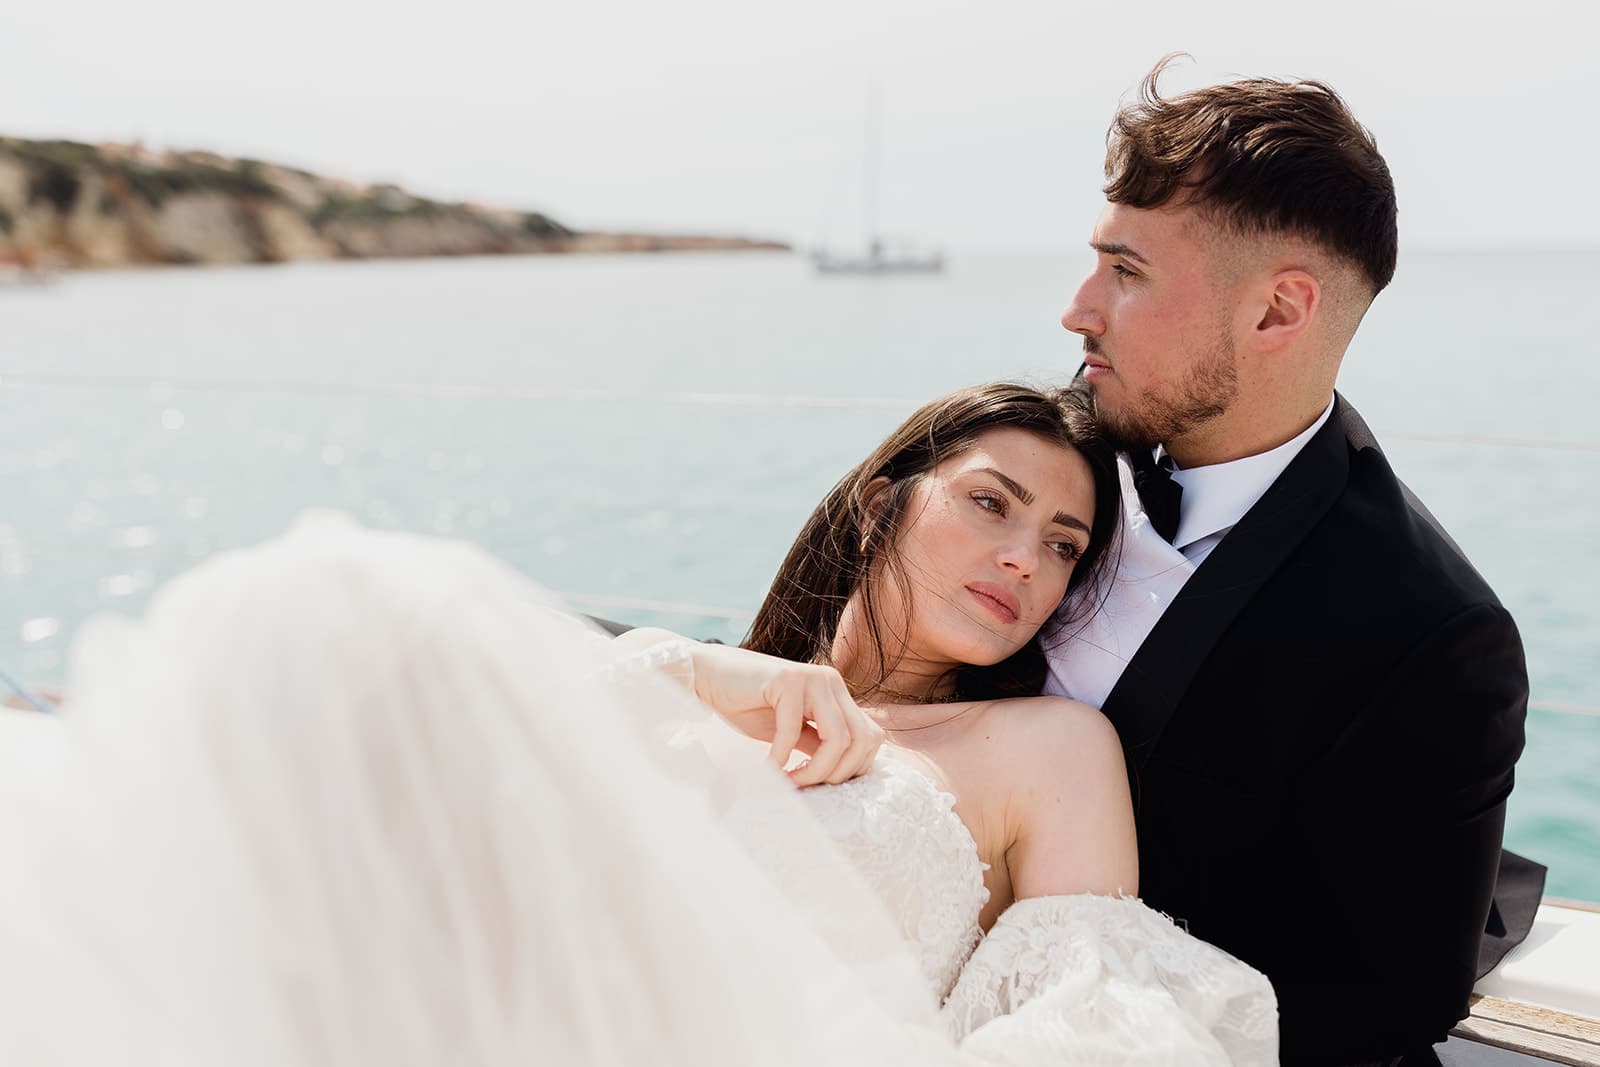 Bride on a boat at a French riviera wedding